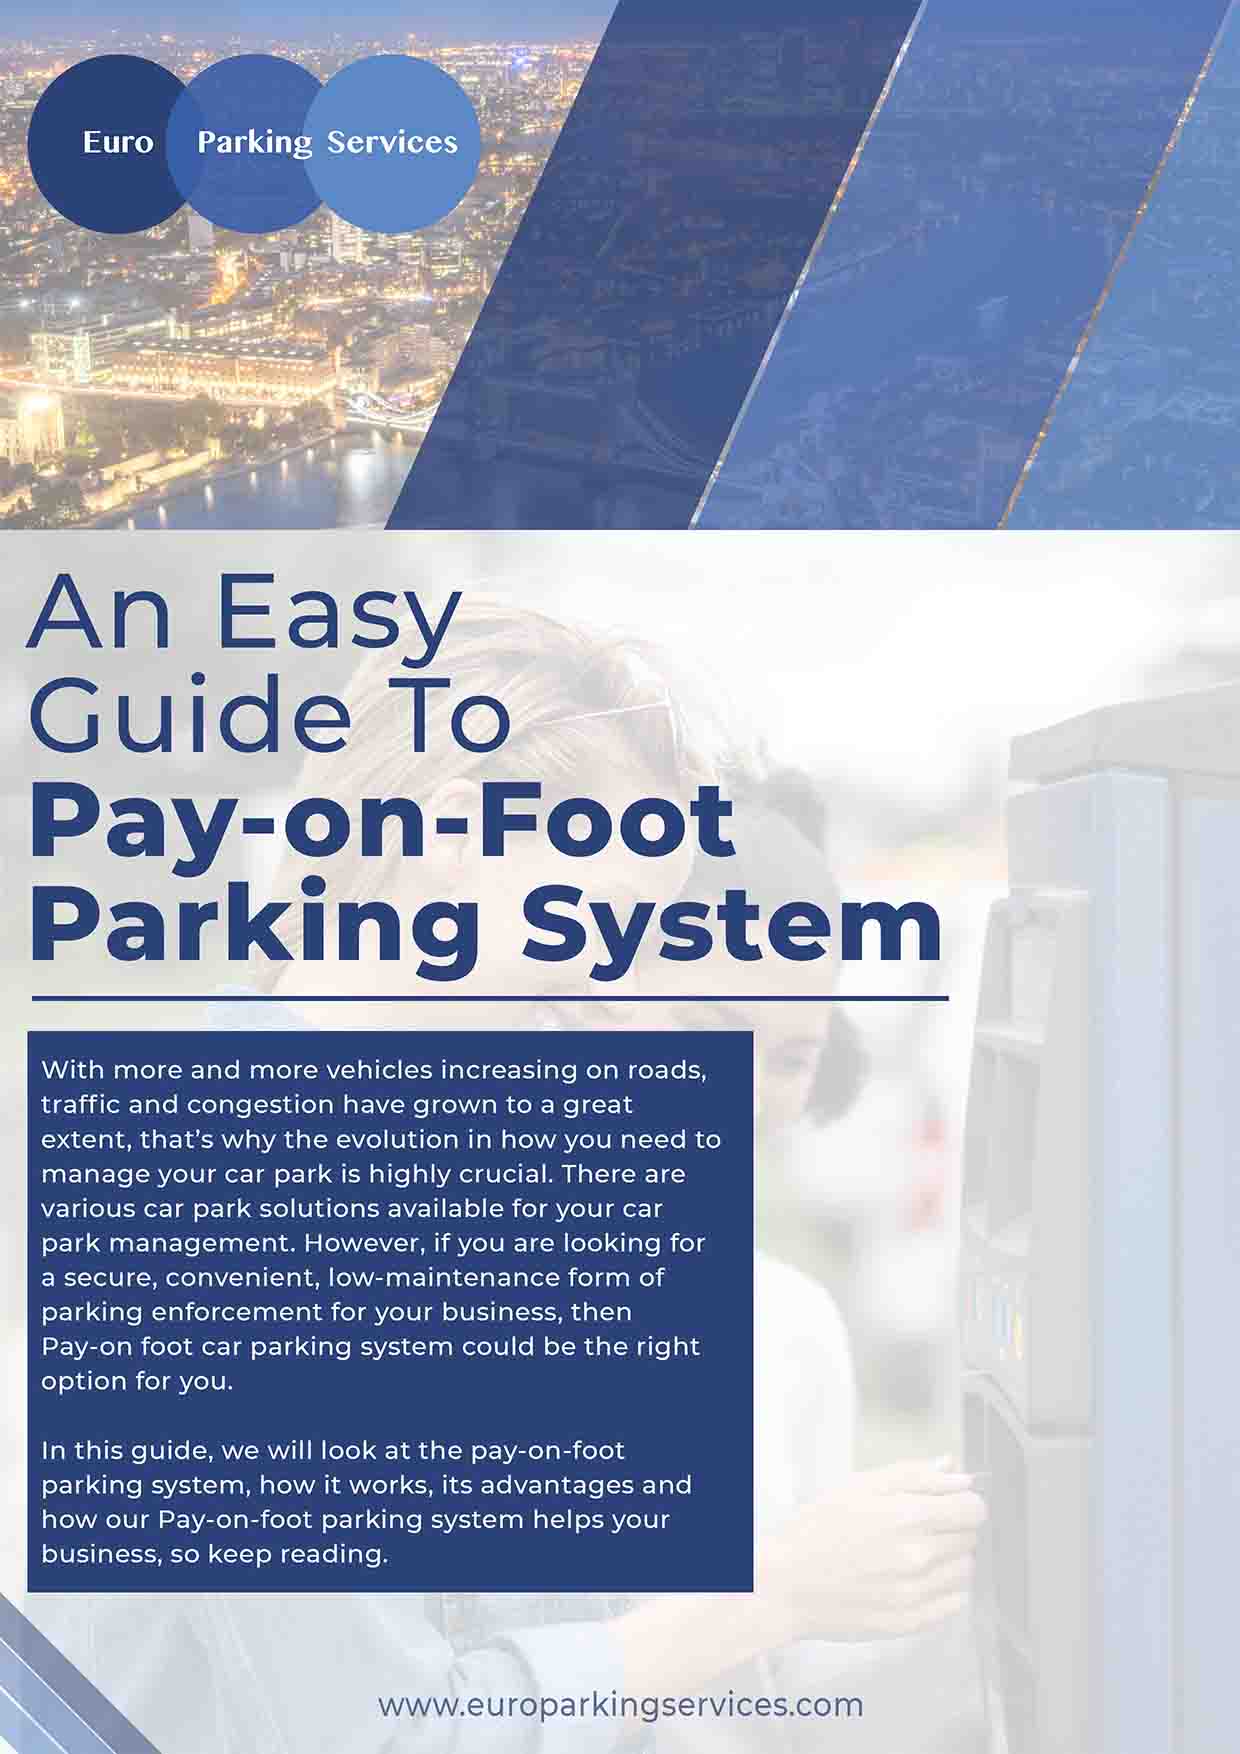 An Easy Guide To Pay-on-Foot Parking System